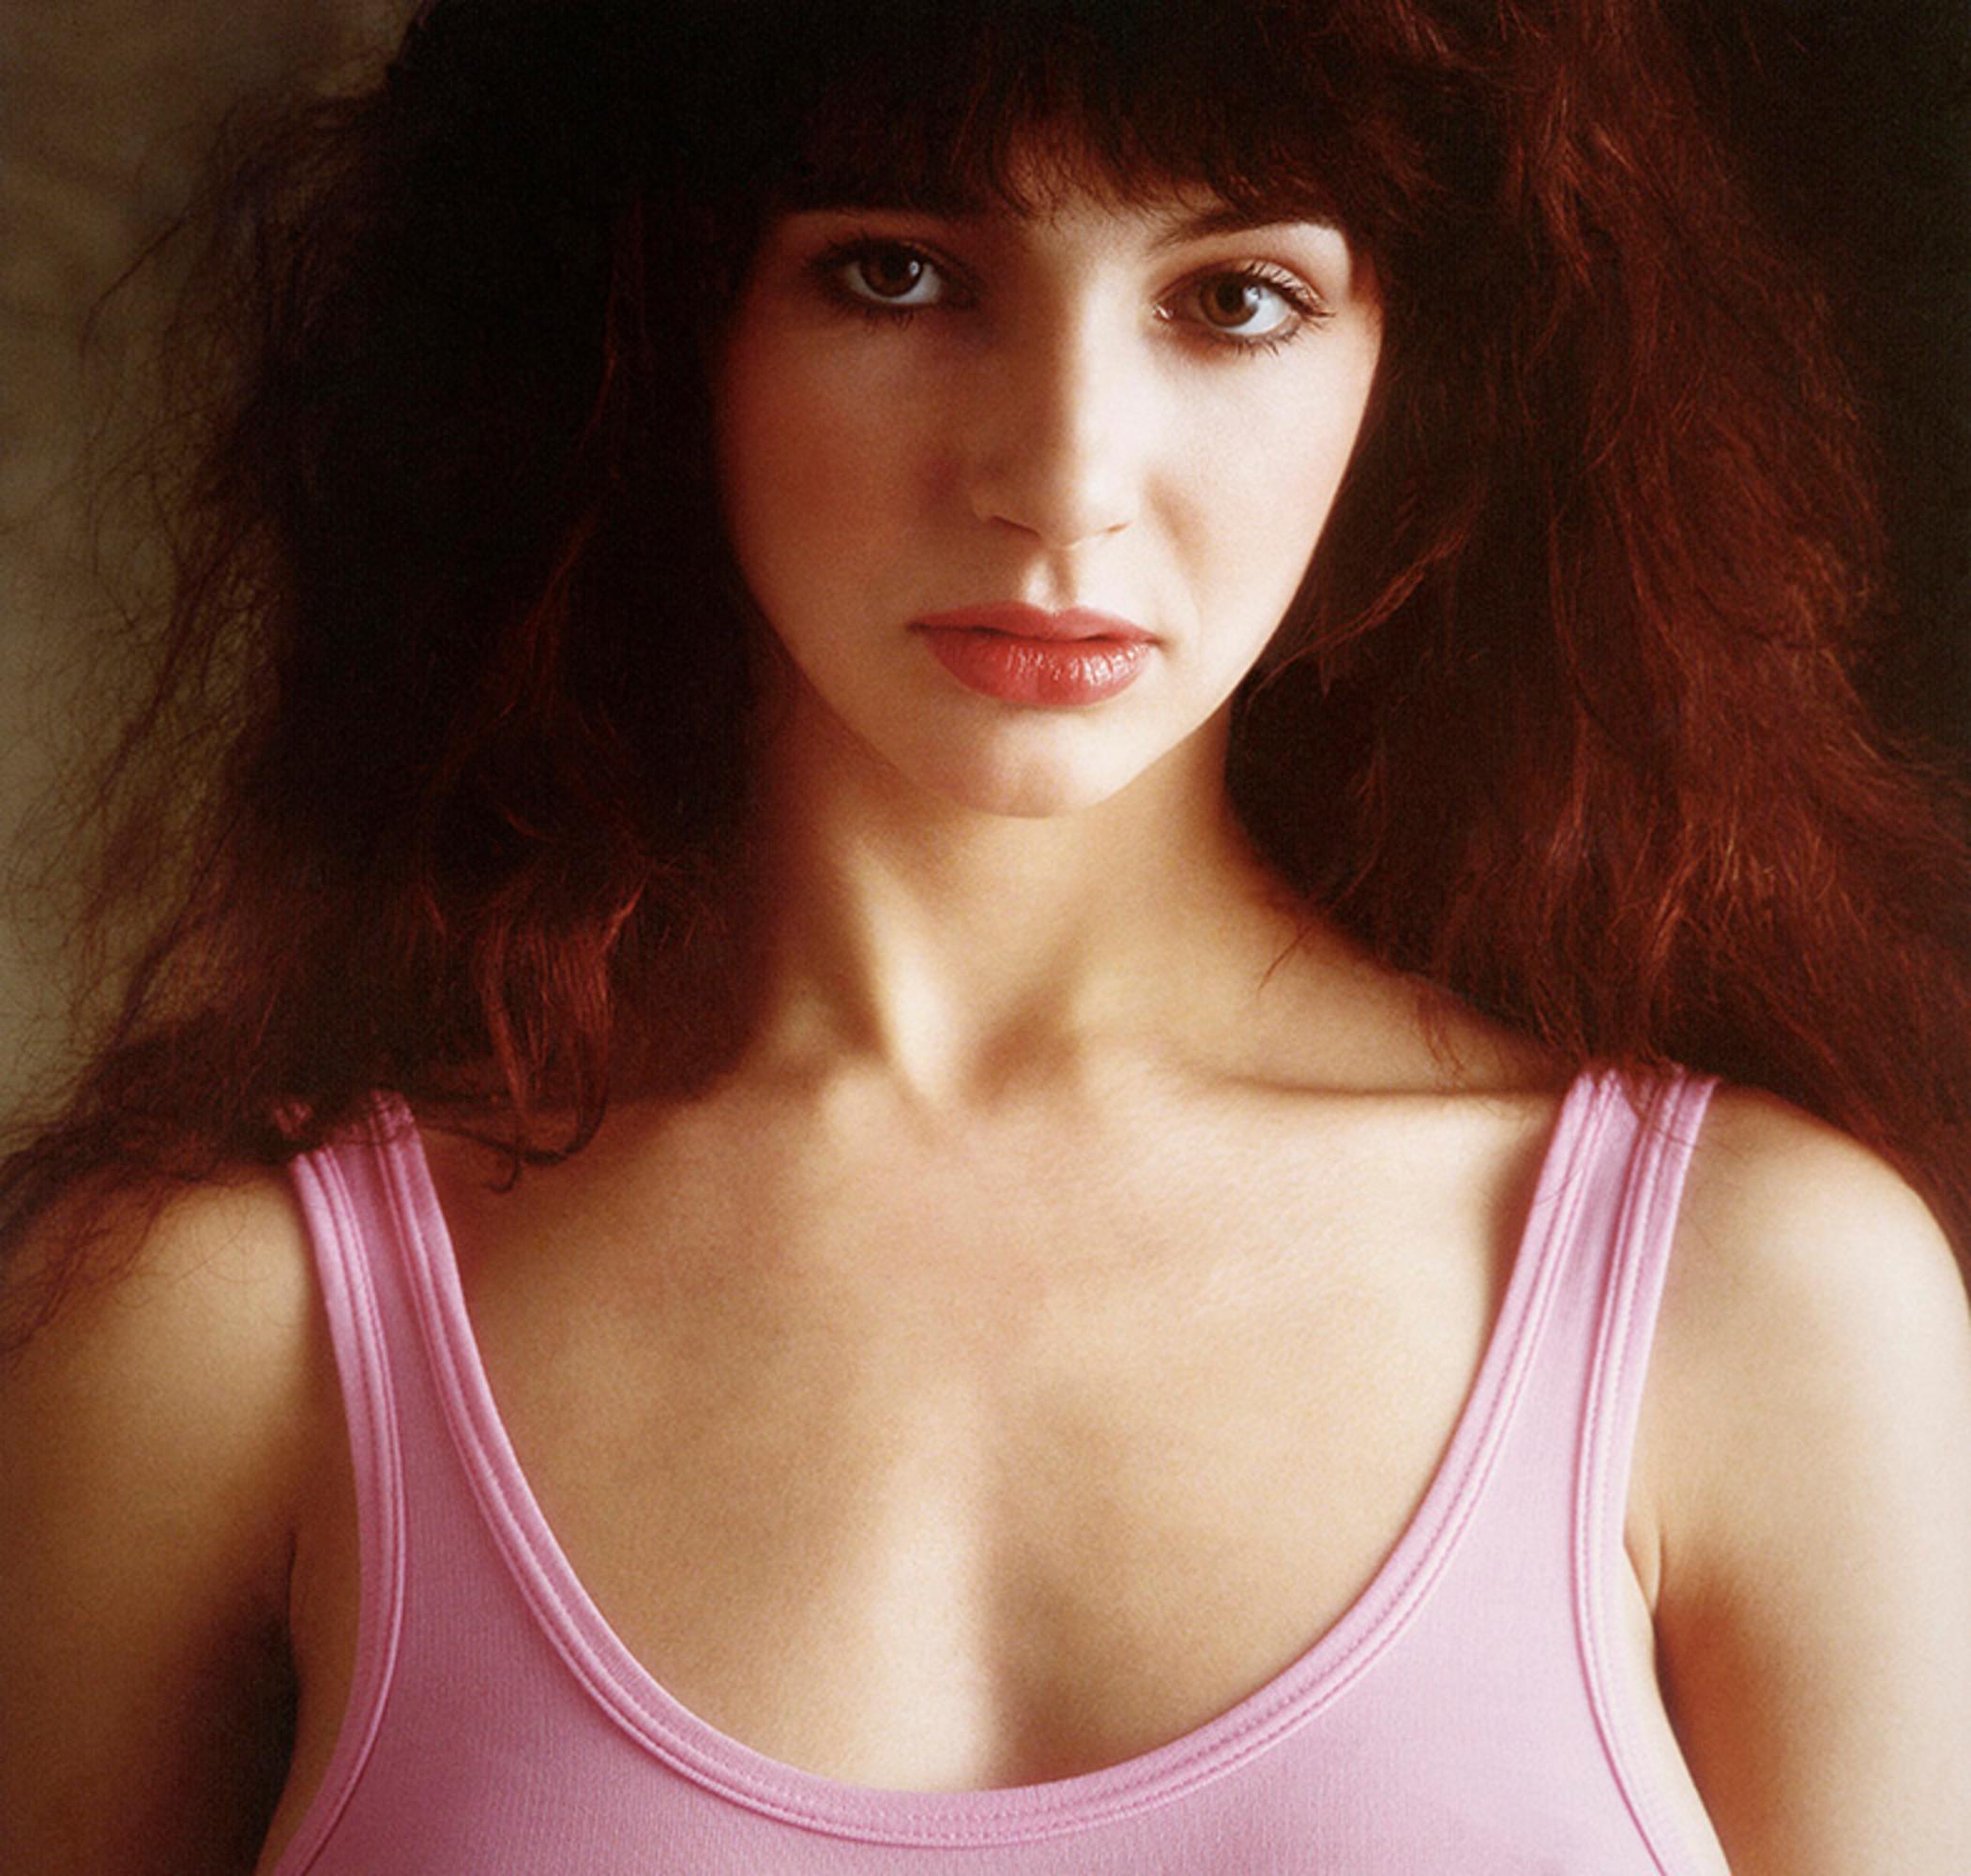 C-type print signed and numbered by Gered Mankowitz

Kate Bush, photographed in London, 1978.

Available Sizes:
16" x 20” Edition of 50
20" x 24” Edition of 50
30" x 40” Edition of 25
50” x 53” Edition of 24

This photograph will be printed once